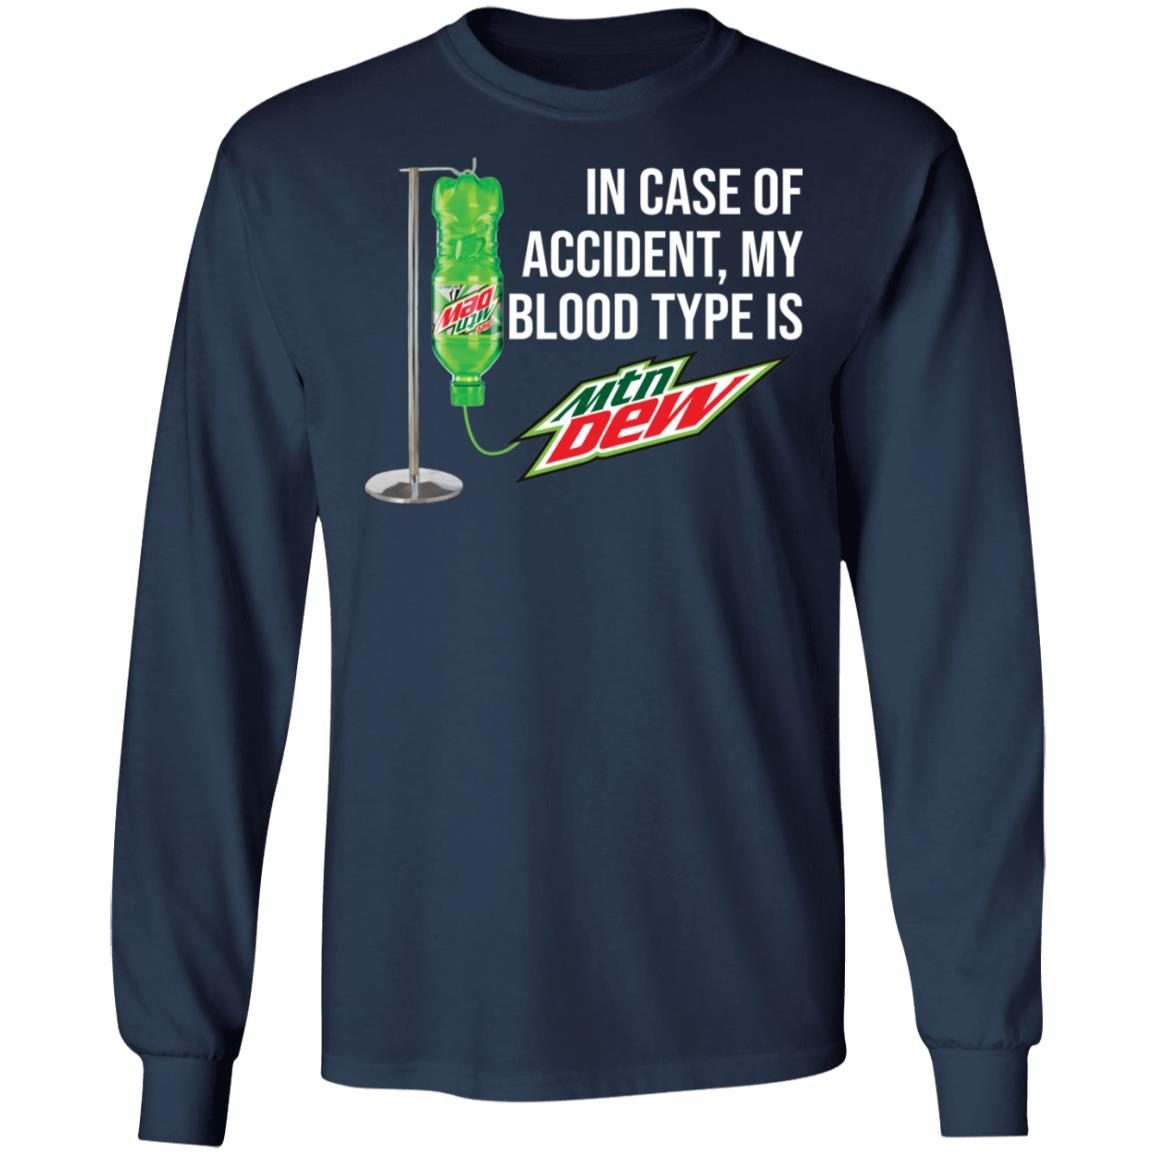 In case of accident my blood type is Mountain Dew